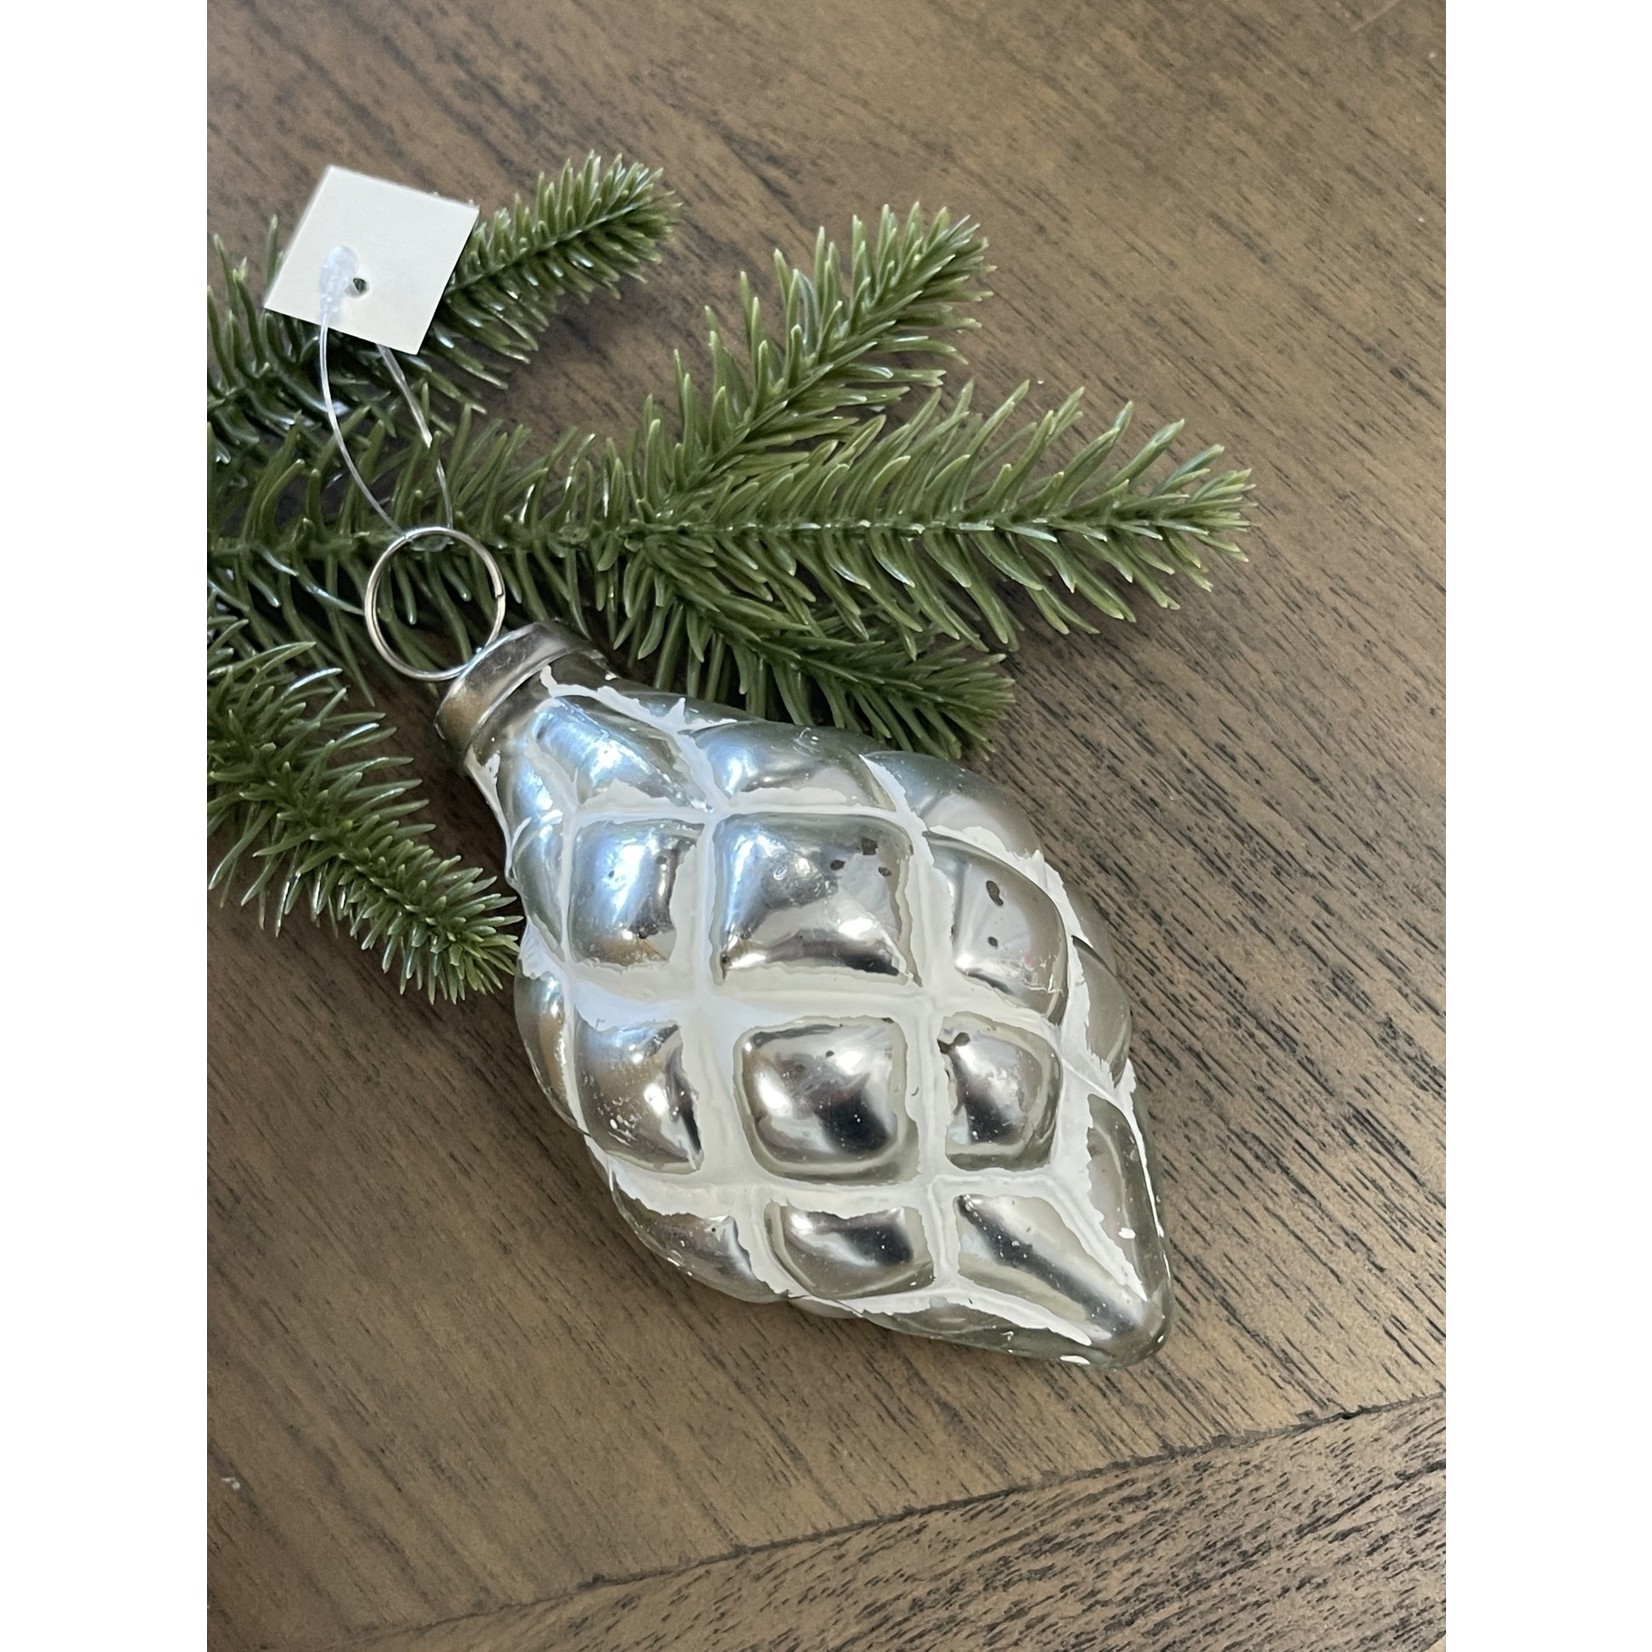 Cottage White Finial Glass Ornament